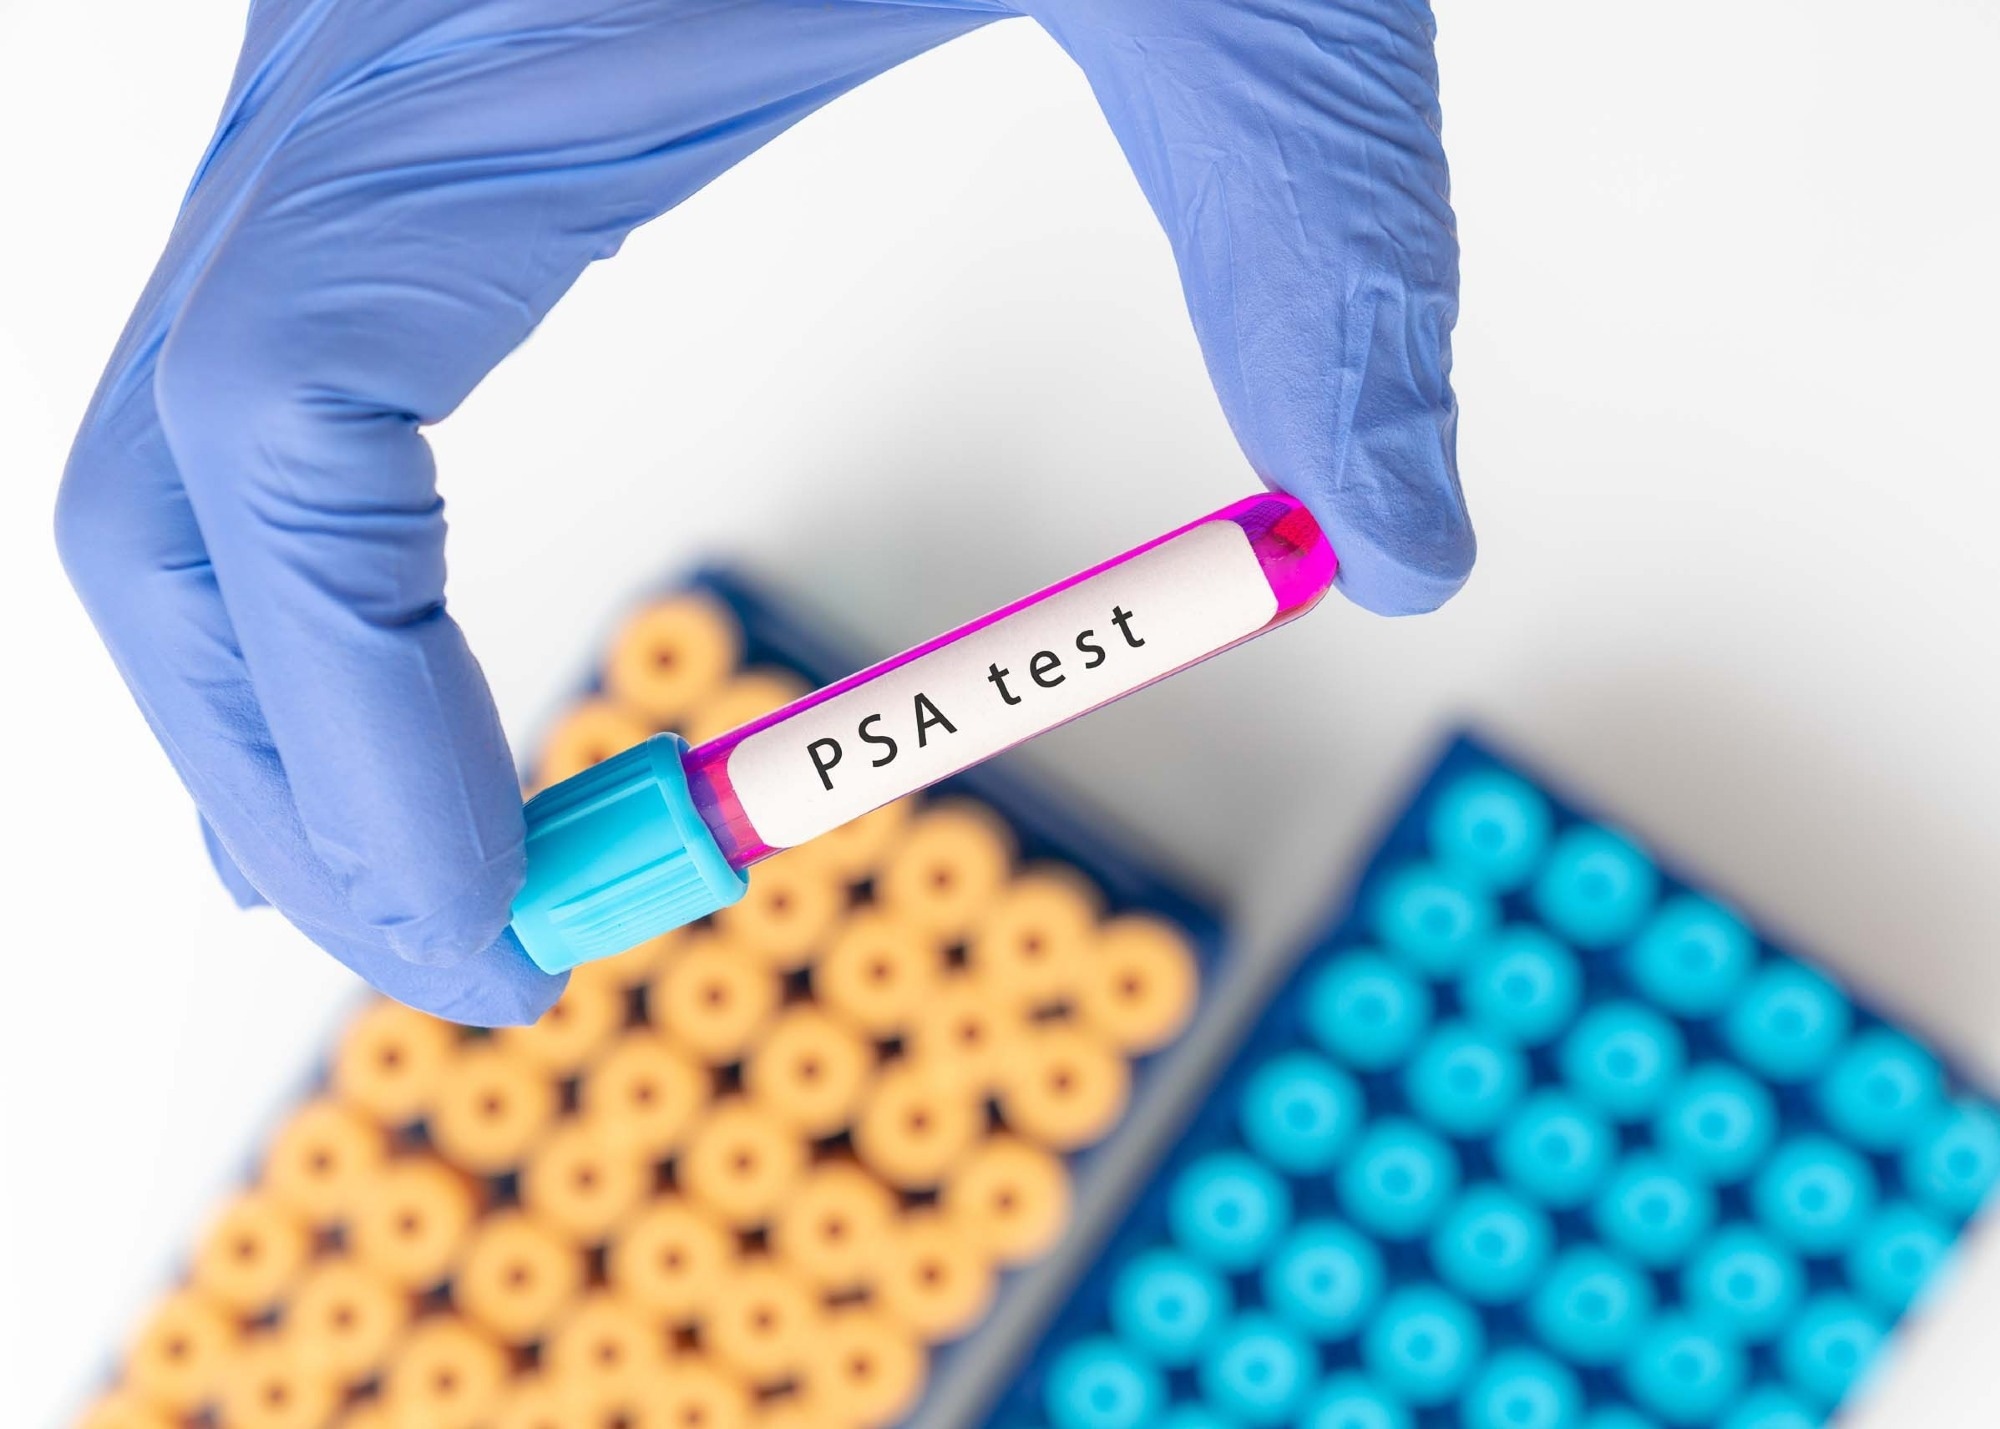 Study: Genetically adjusted PSA levels for prostate cancer screening. Image Credit: luchschenF/Shutterstock.com